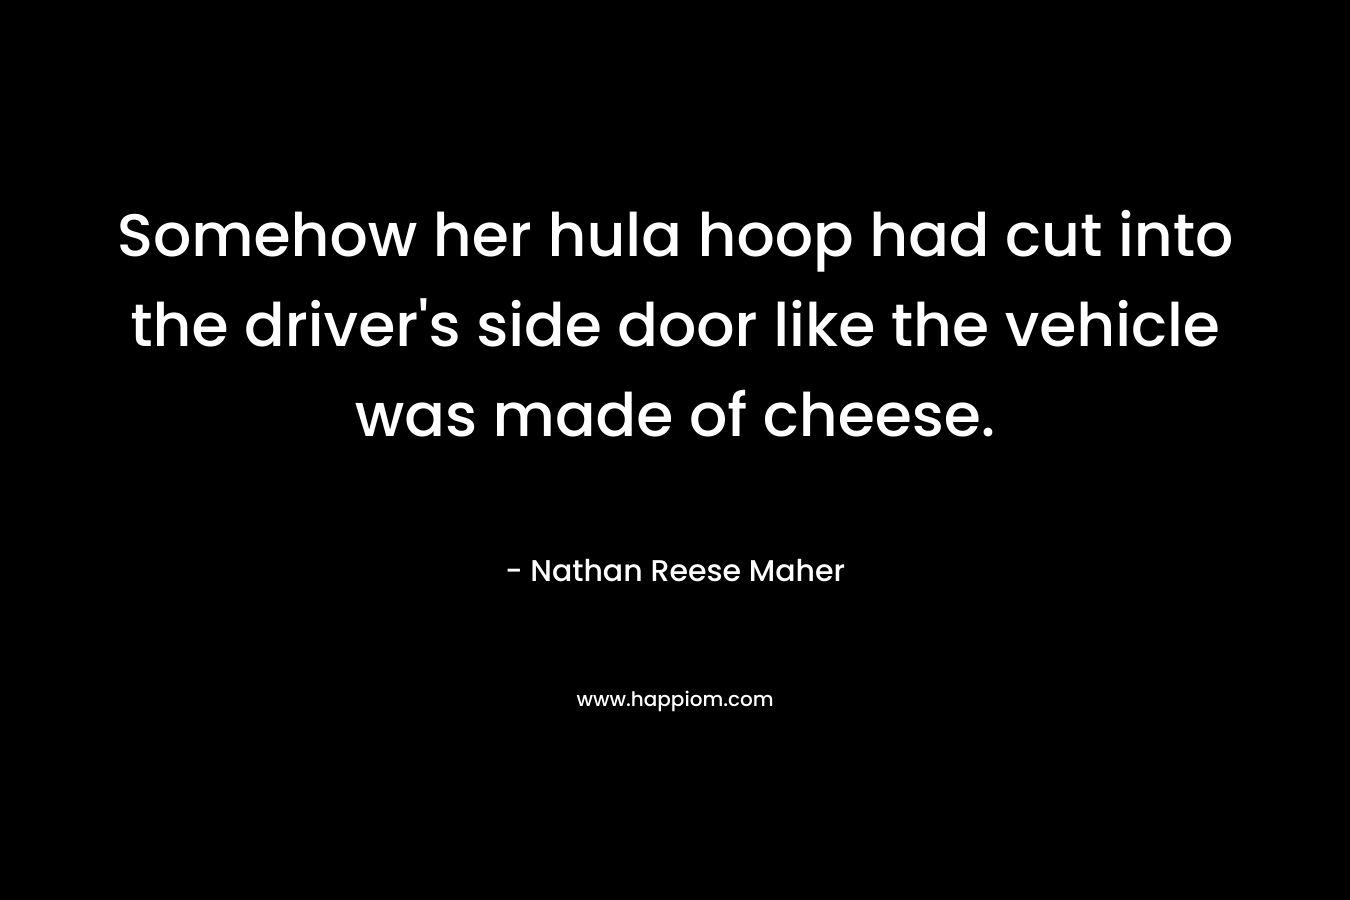 Somehow her hula hoop had cut into the driver’s side door like the vehicle was made of cheese. – Nathan Reese Maher